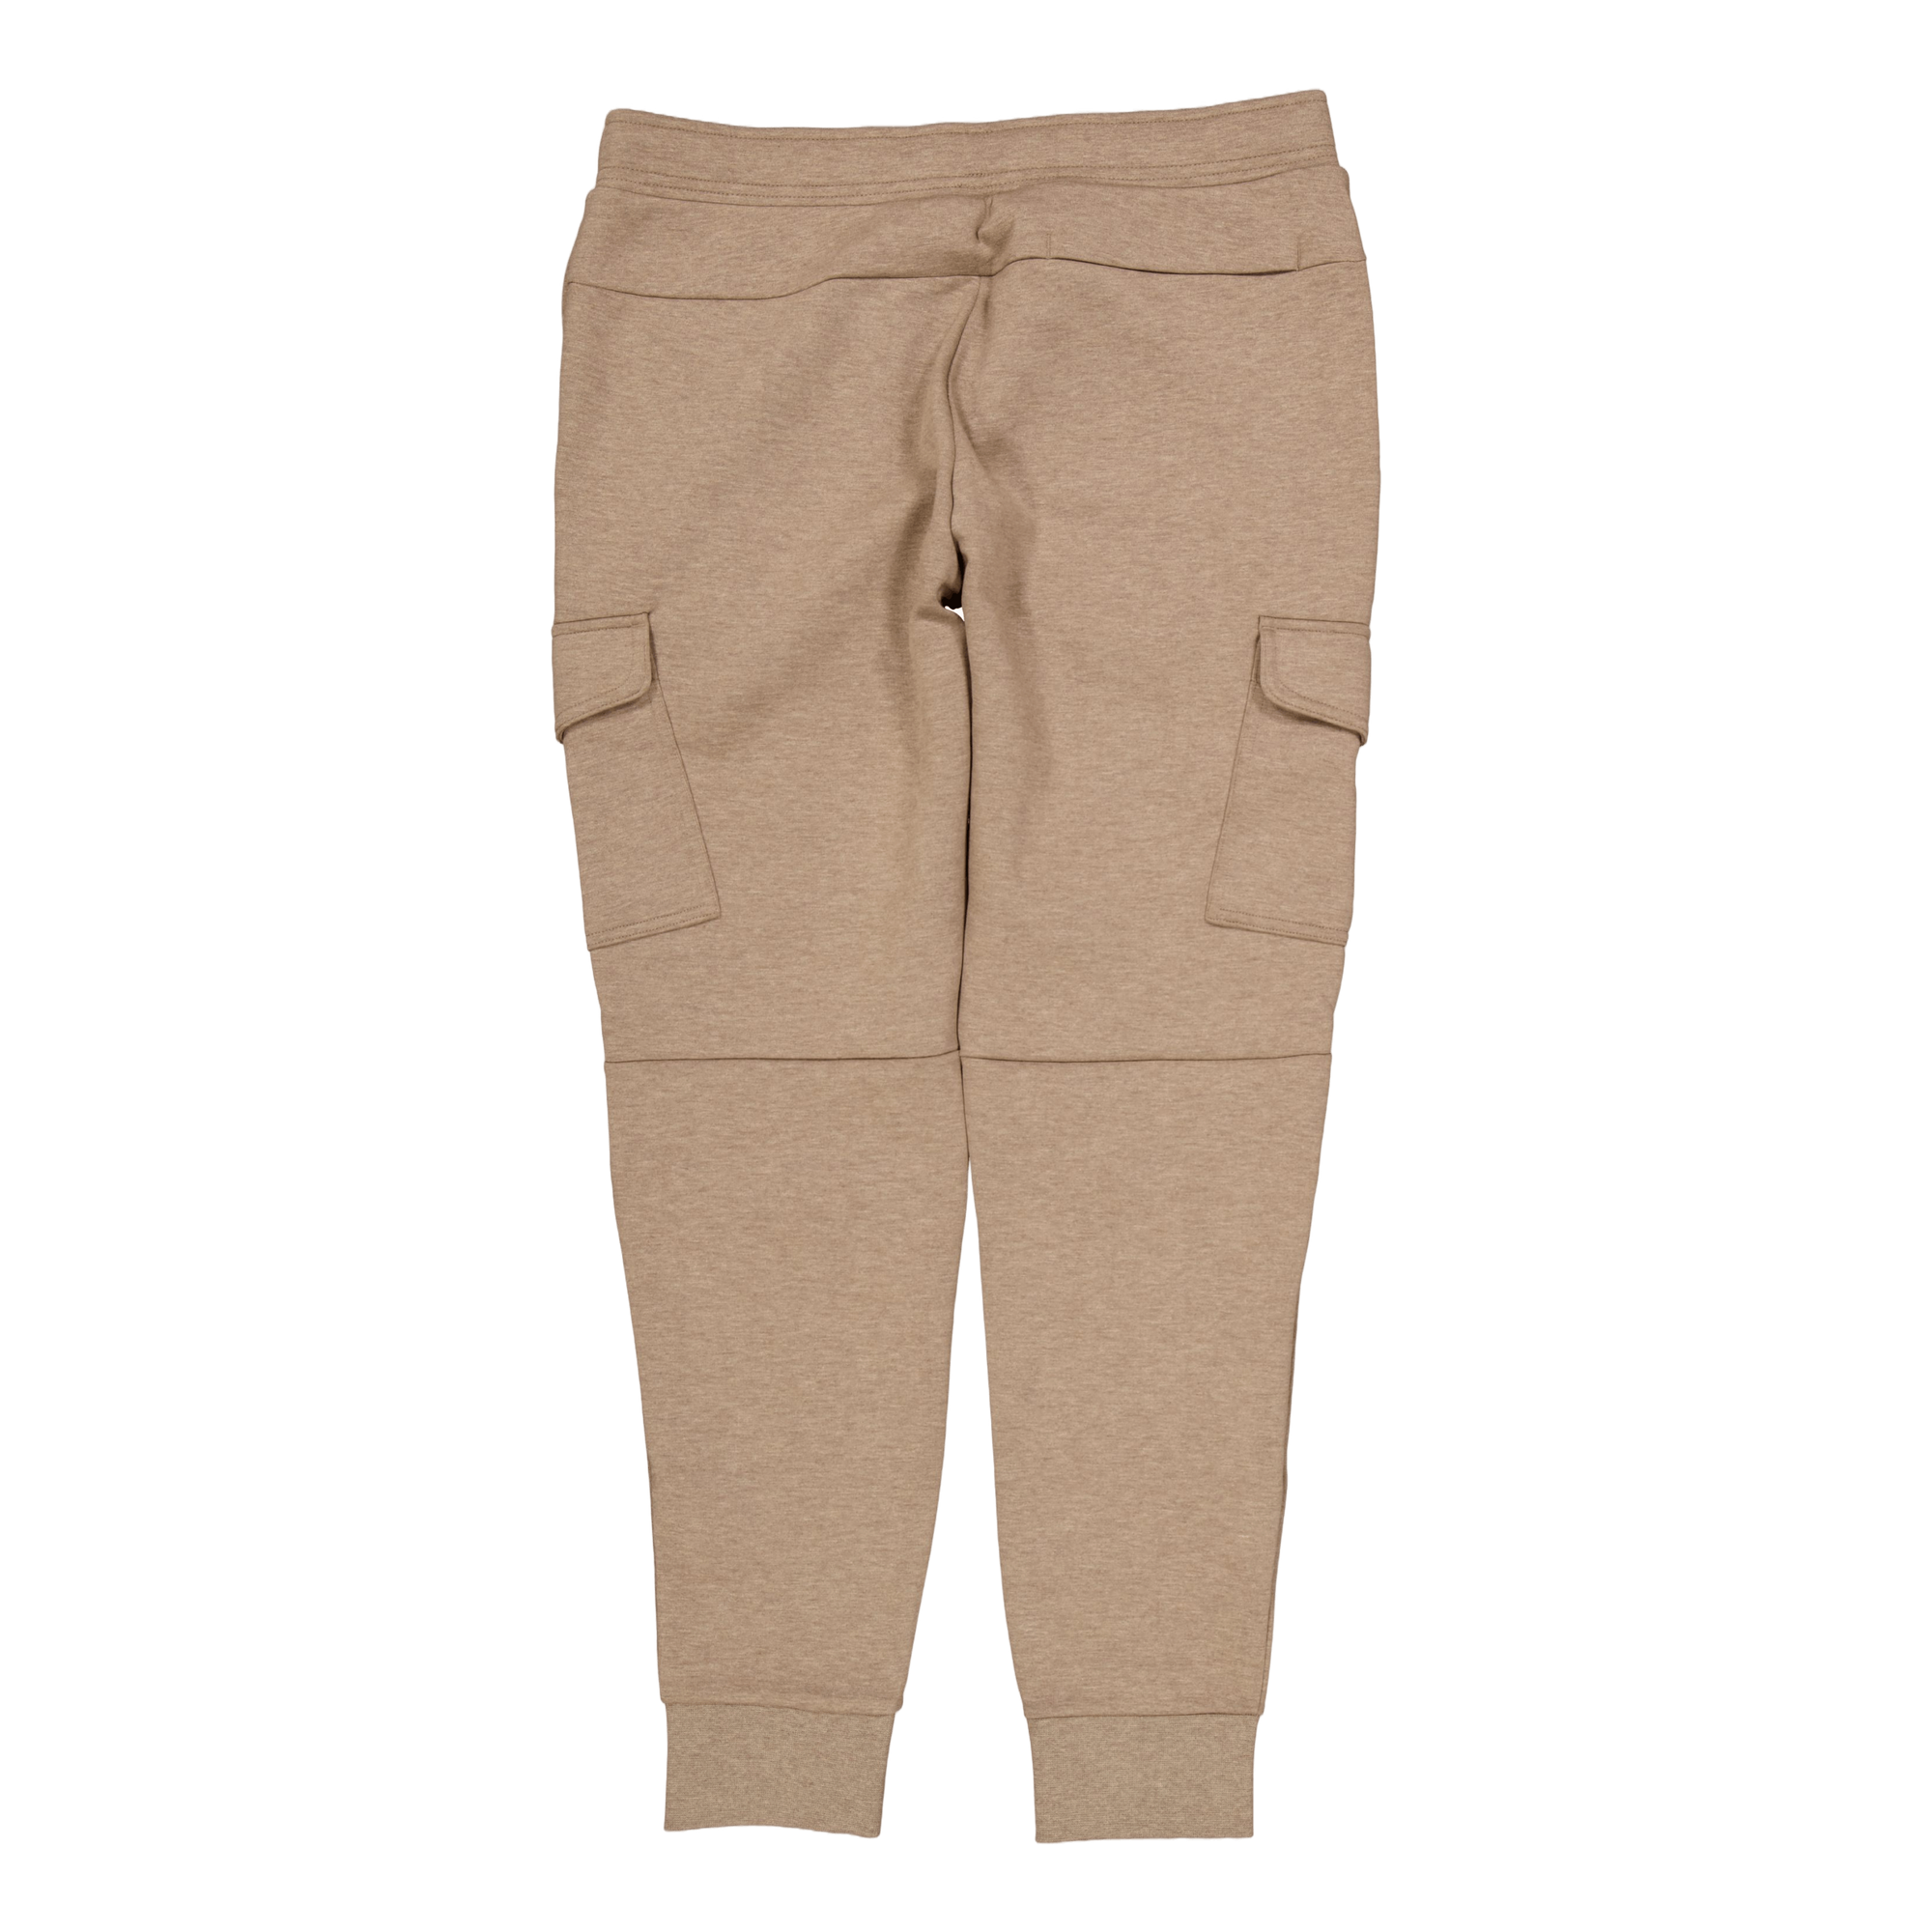 Double-Knit Cargo Jogger Pant Dark Taupe Heather